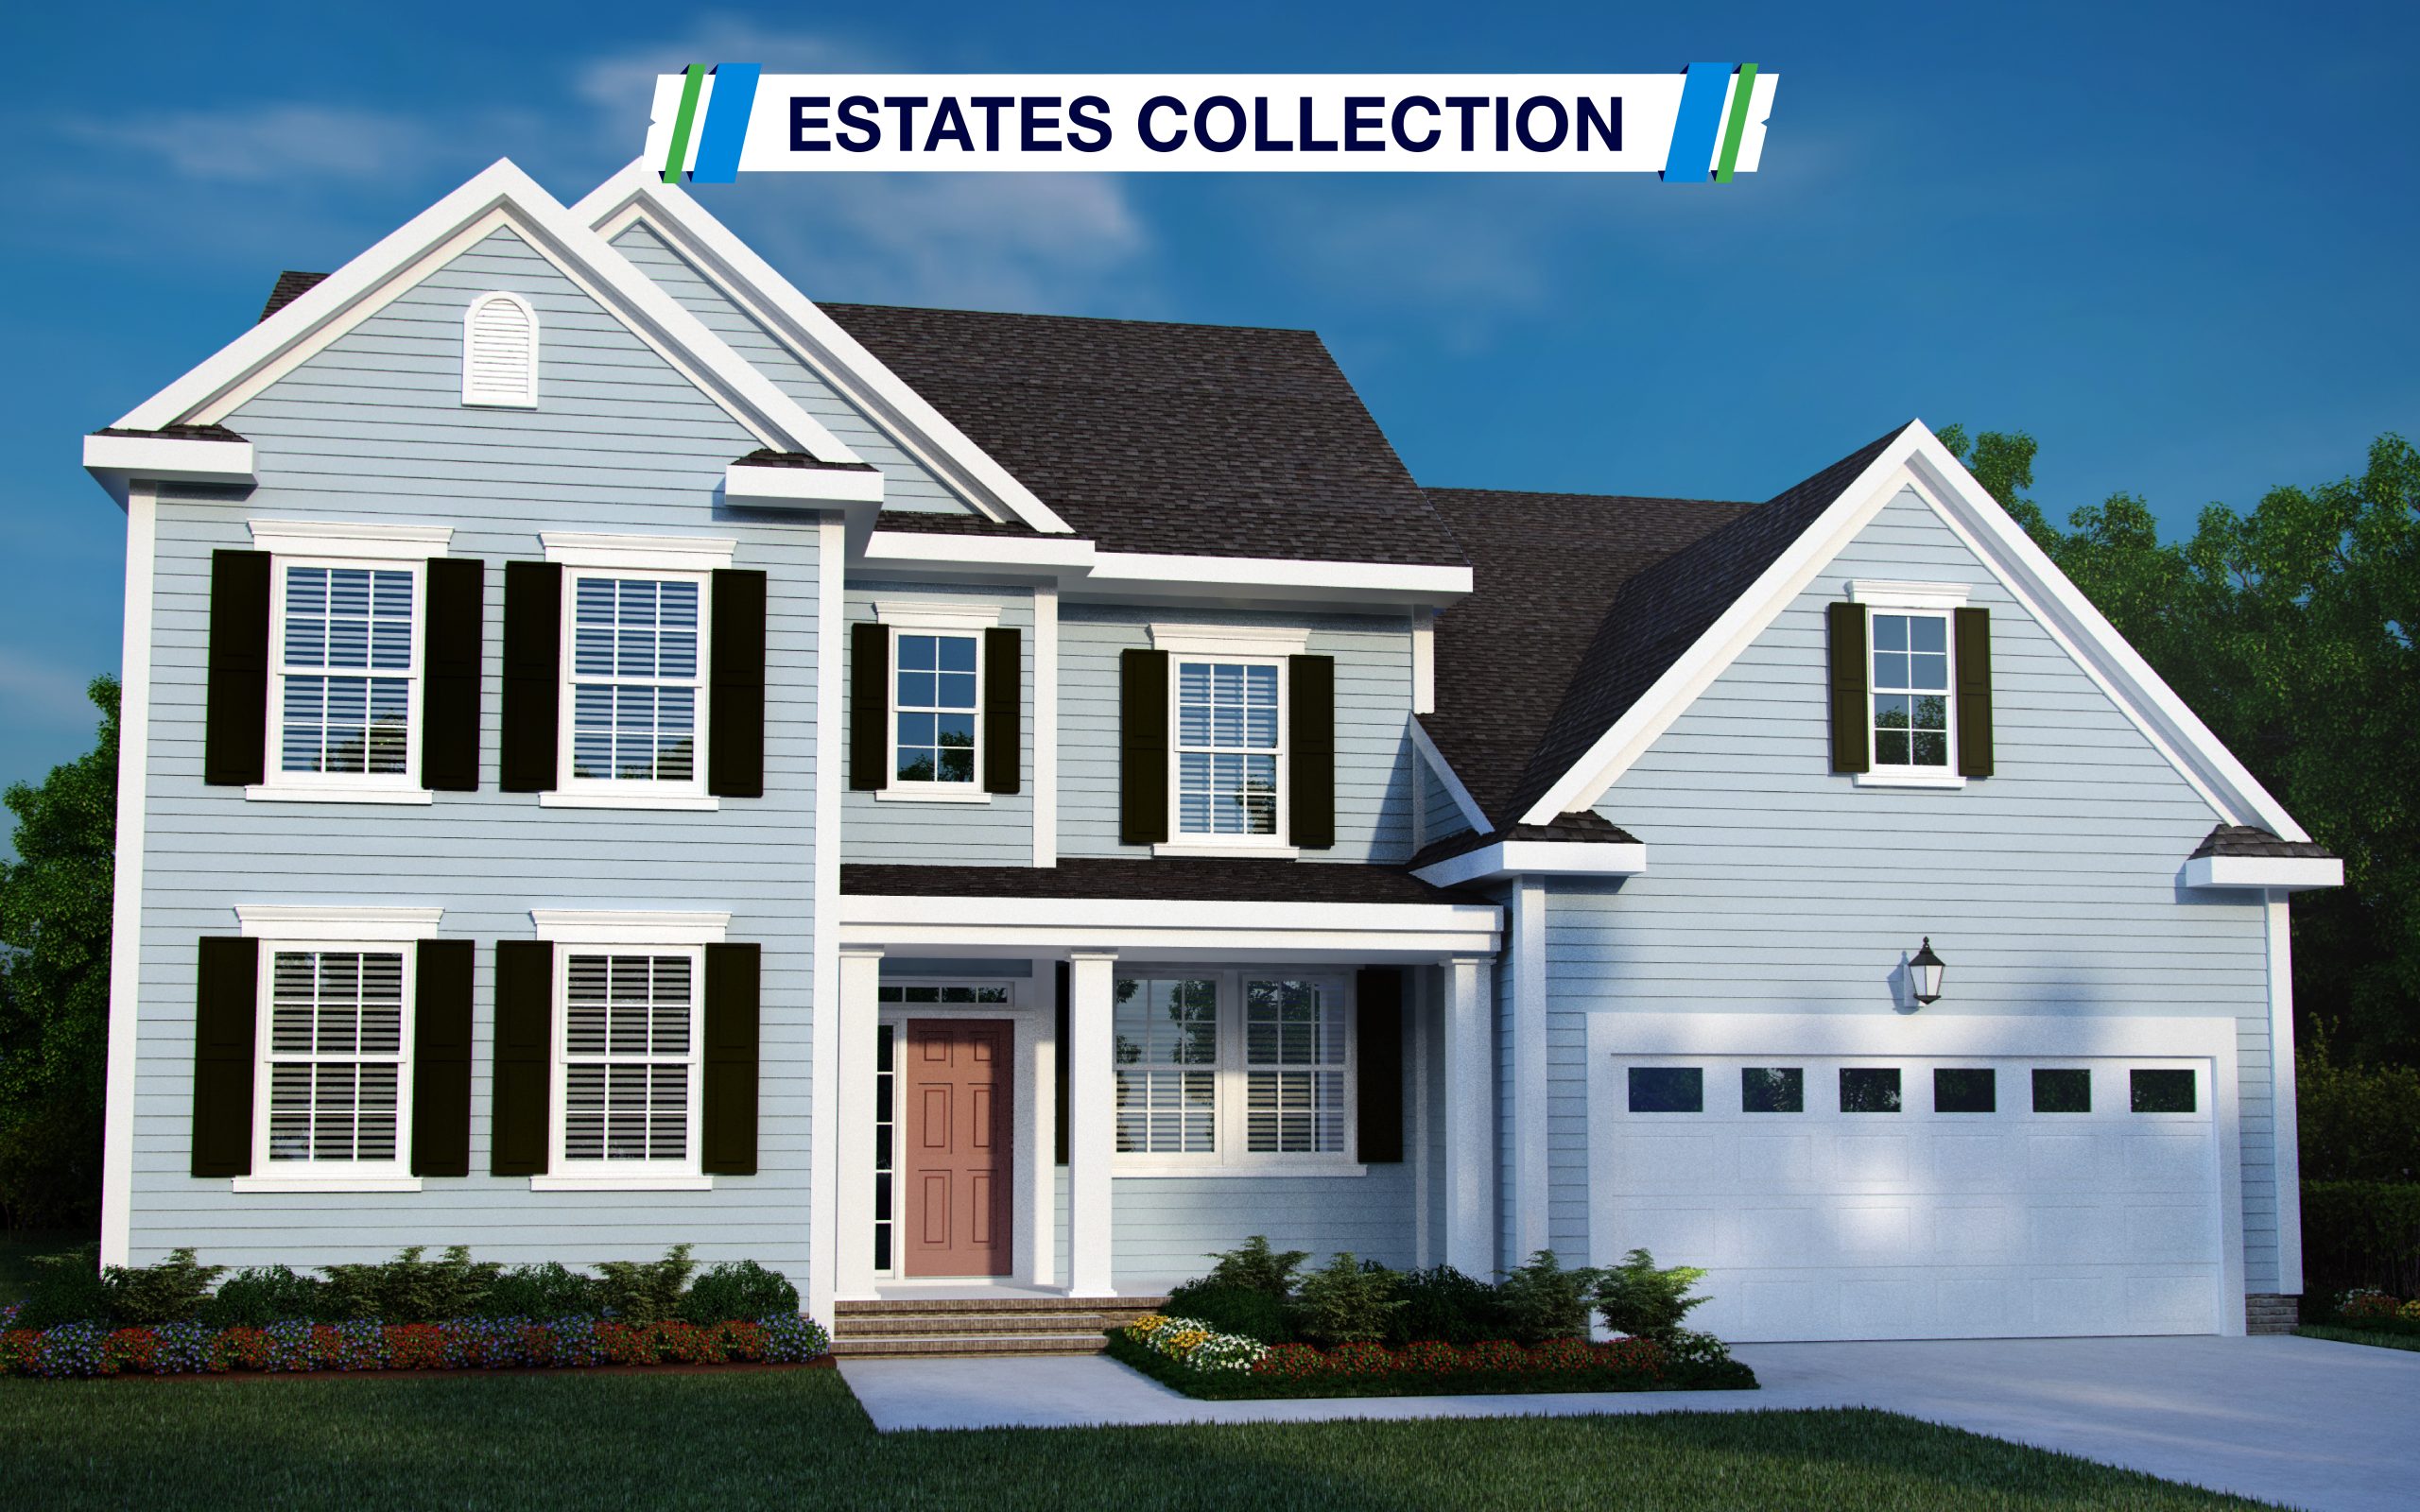 Image of the Milan II Model - the Estates Collection. Image shows the front of the two story home, two car garage, and nine windows.